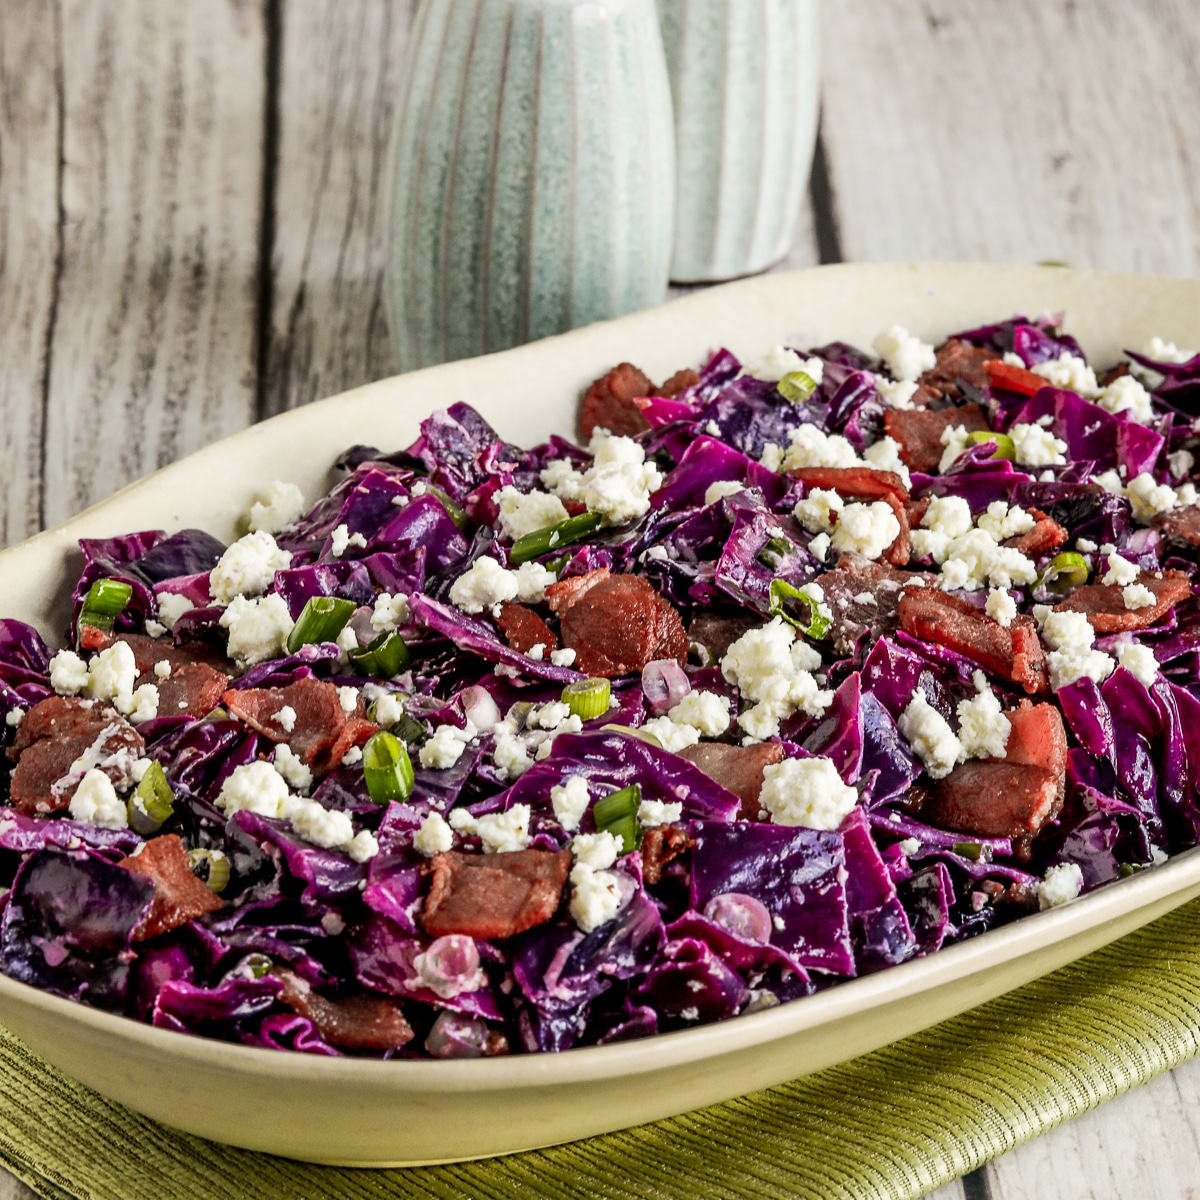 Square image of red cabbage salad with bacon and goat cheese displayed on a serving plate